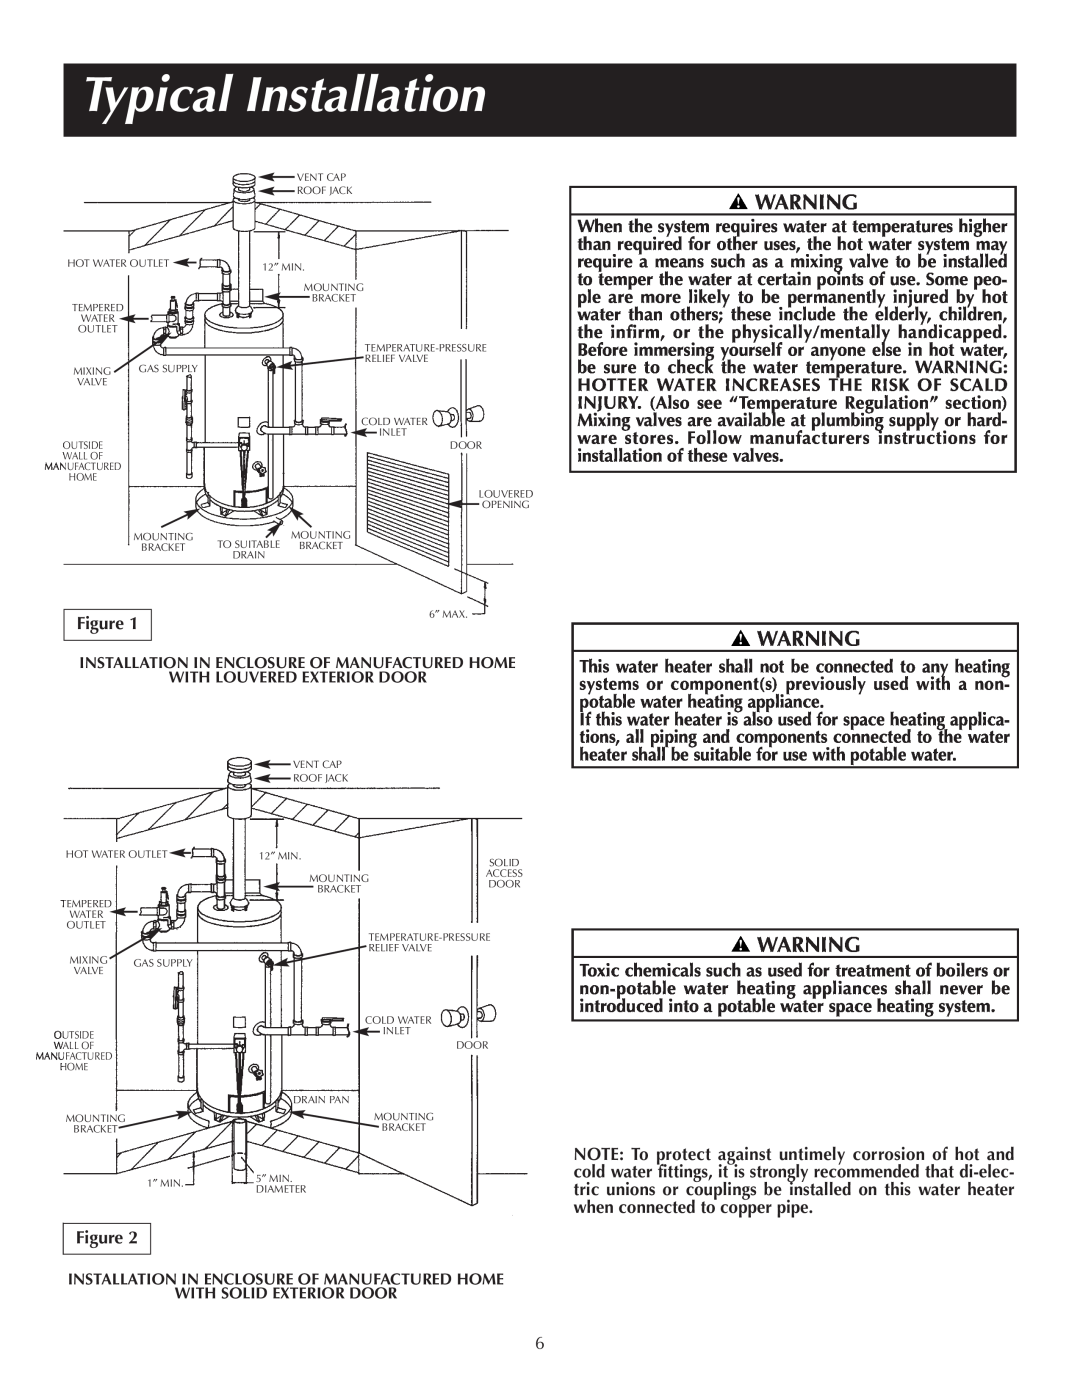 Reliance Water Heaters 184123-000 instruction manual Typical Installation, Figure 